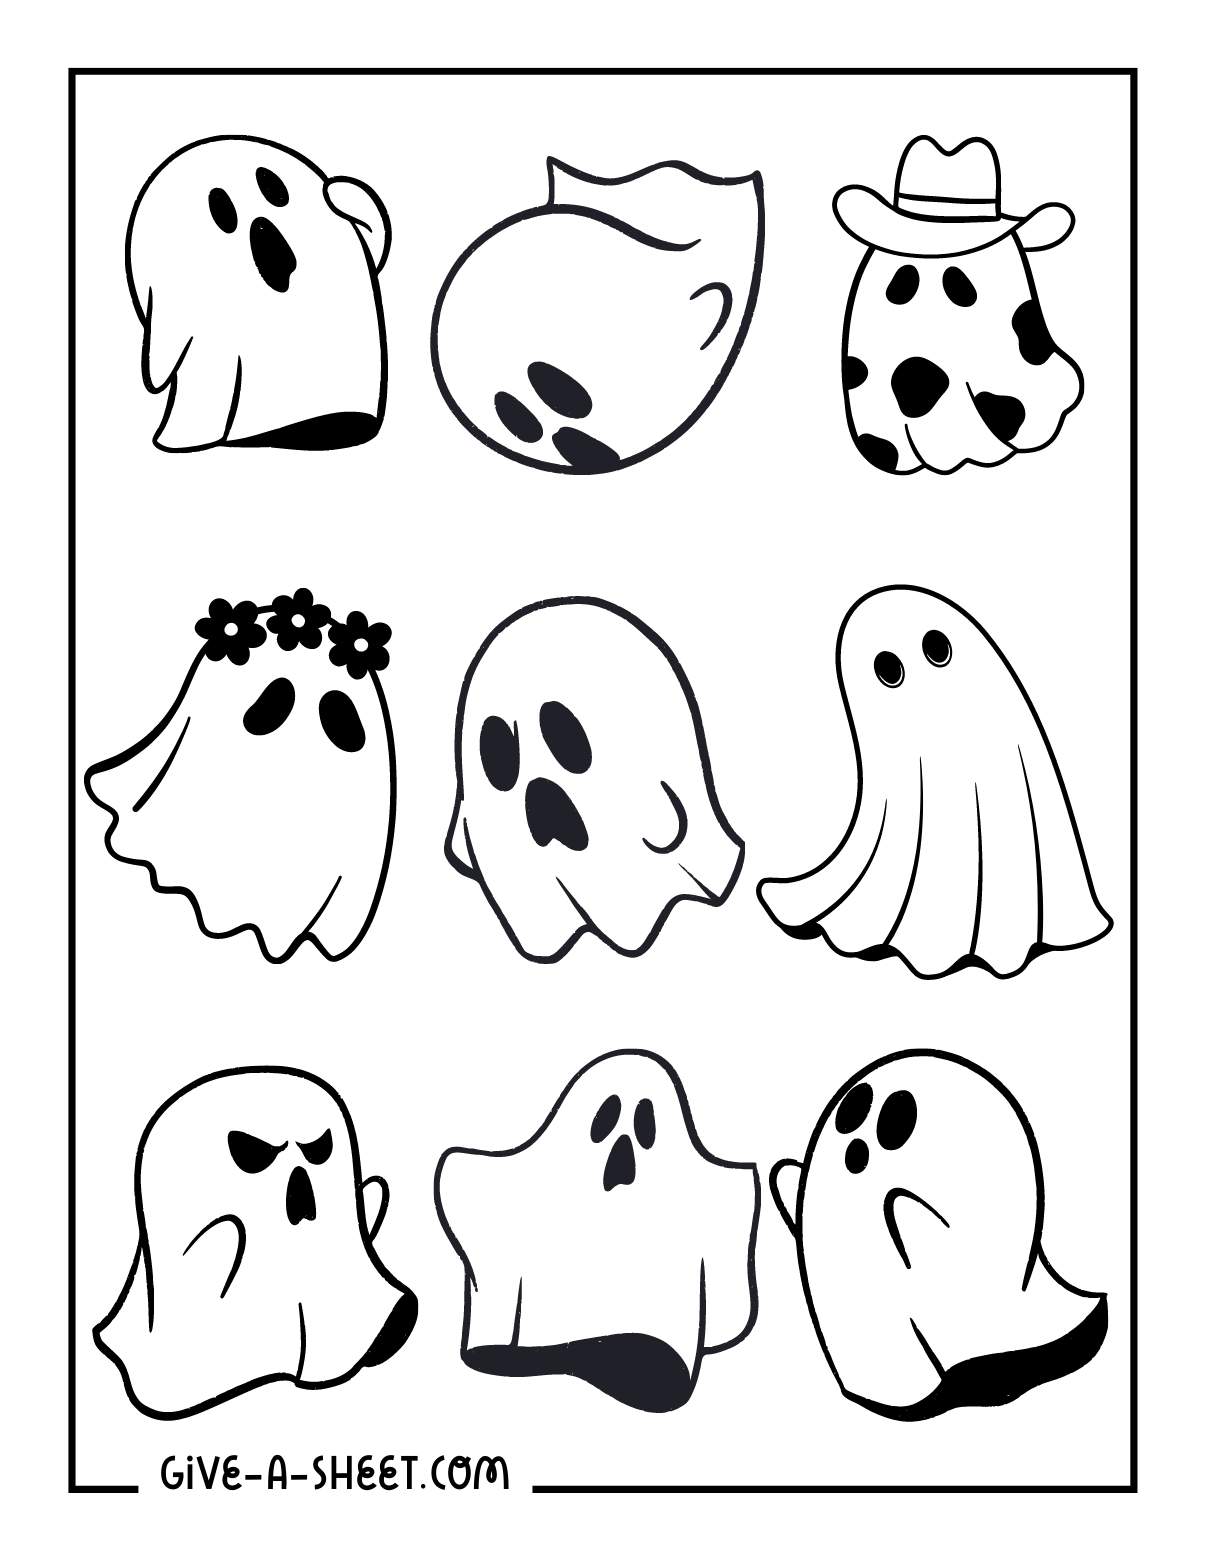 Free printable ghost coloring pages for kids.